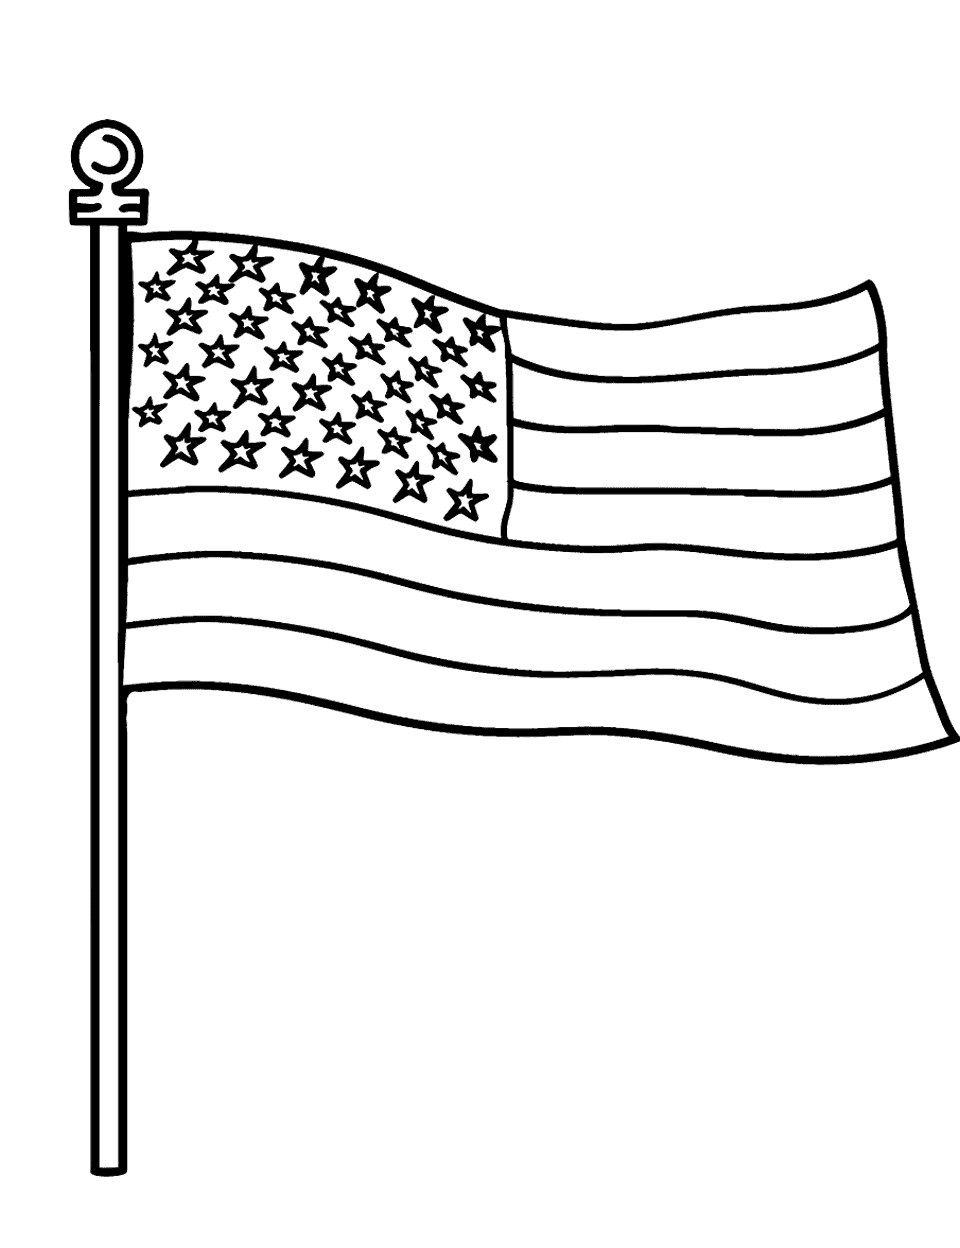 American Flag Waving Coloring Page - A simple American flag waving in the breeze.